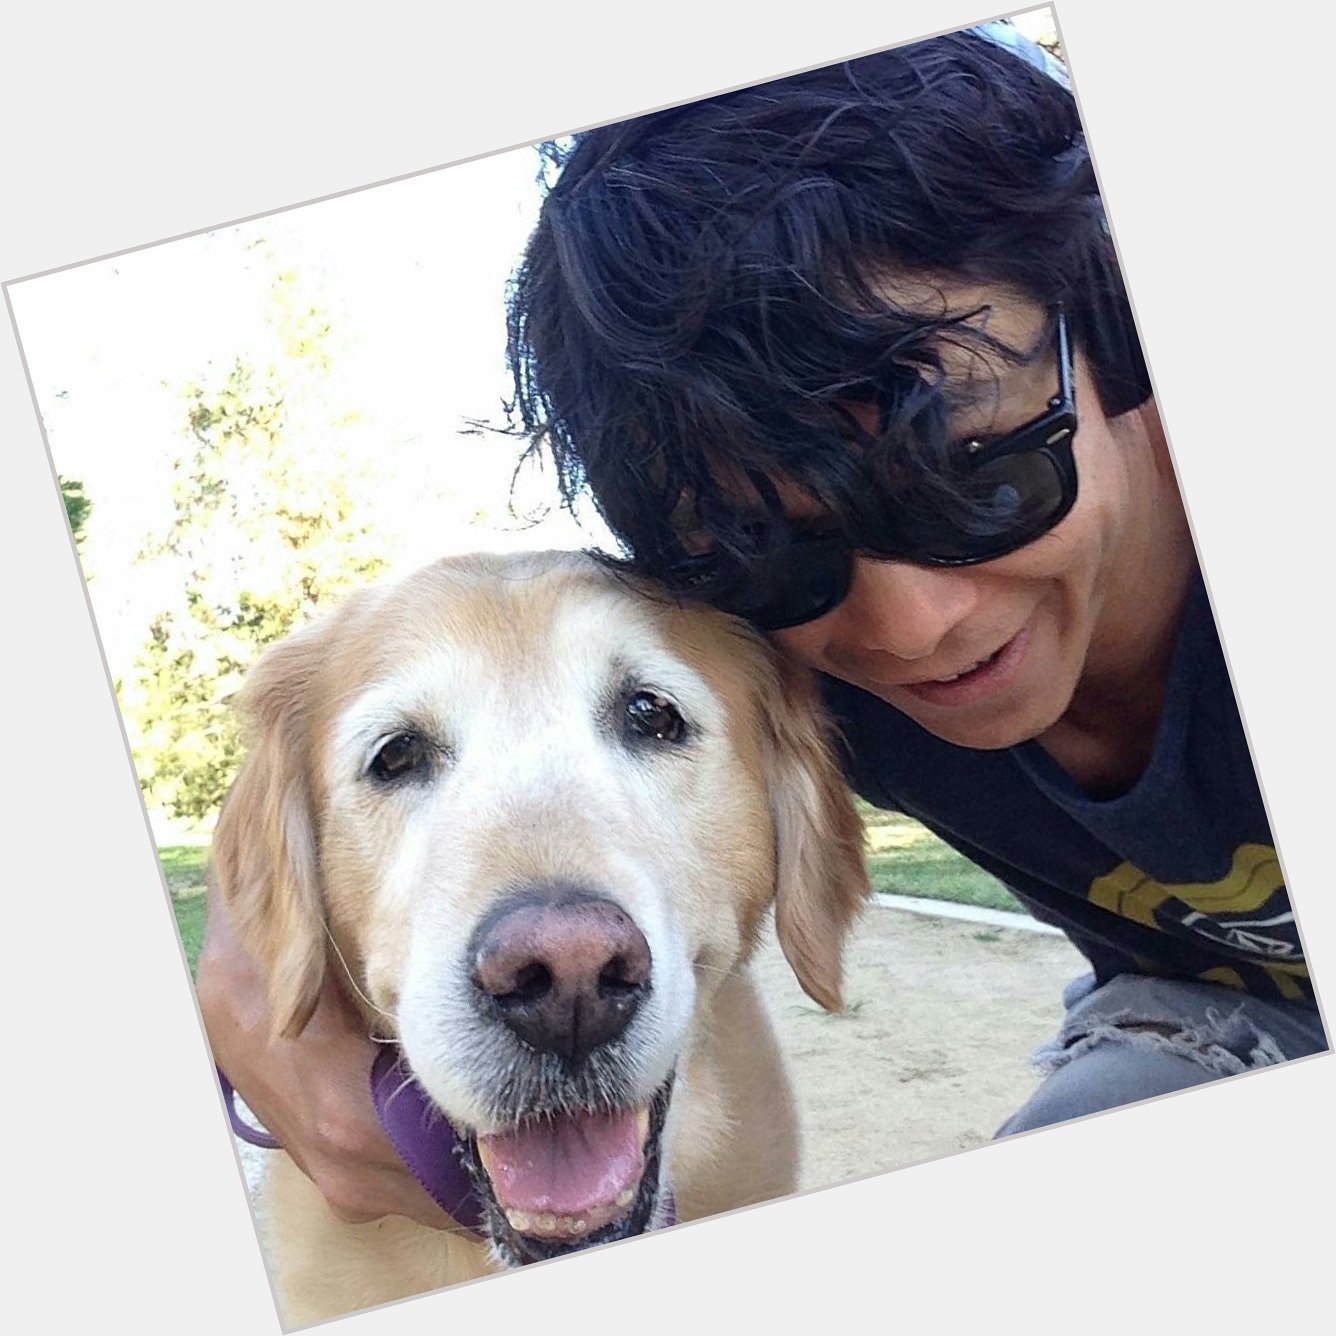 Happy Birthday 2 one of Daniel Henney\s best friends. God Bless ! Much love to you  .. & sweet Mango !!! 